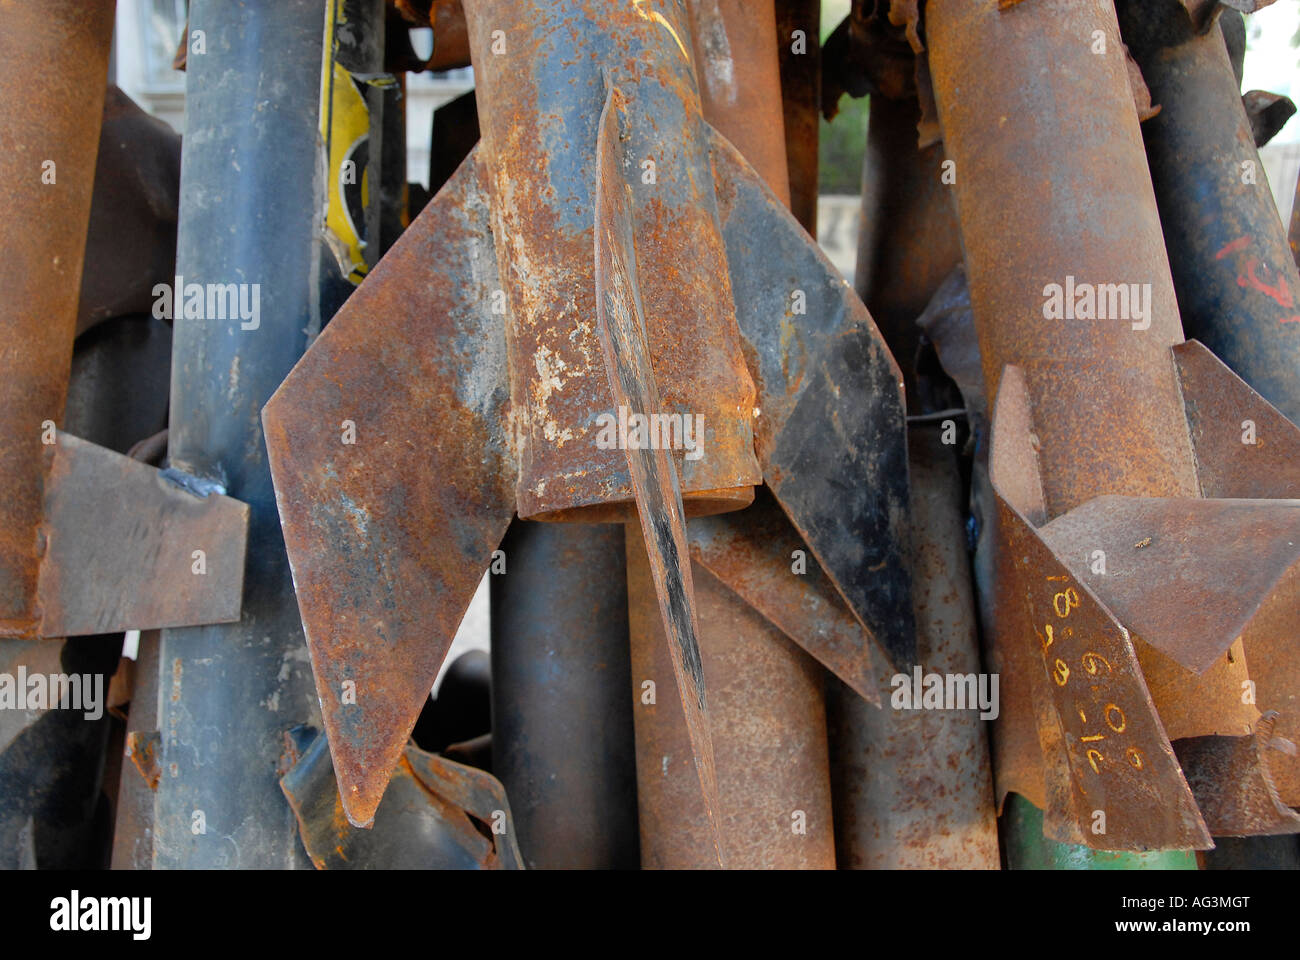 Remnants of Qassam rockets developed by the Izz ad-Din al-Qassam Brigades, the military arm of Hamas in Gaza  fired at the town of Sderot in Israel Stock Photo